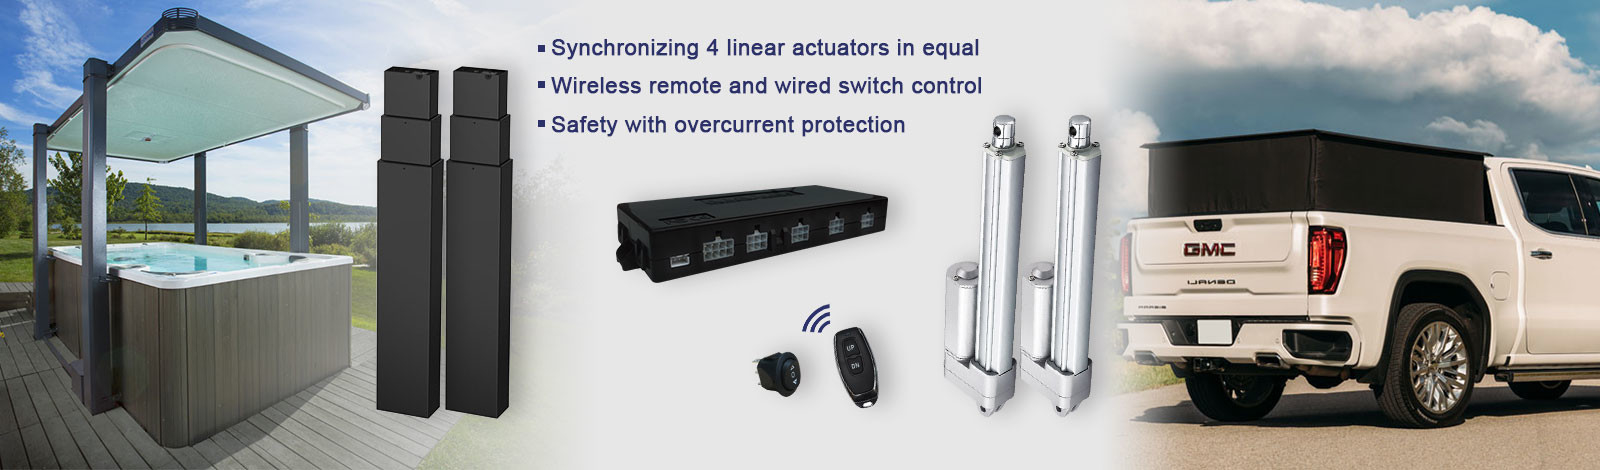 Linear Actuator Controllers